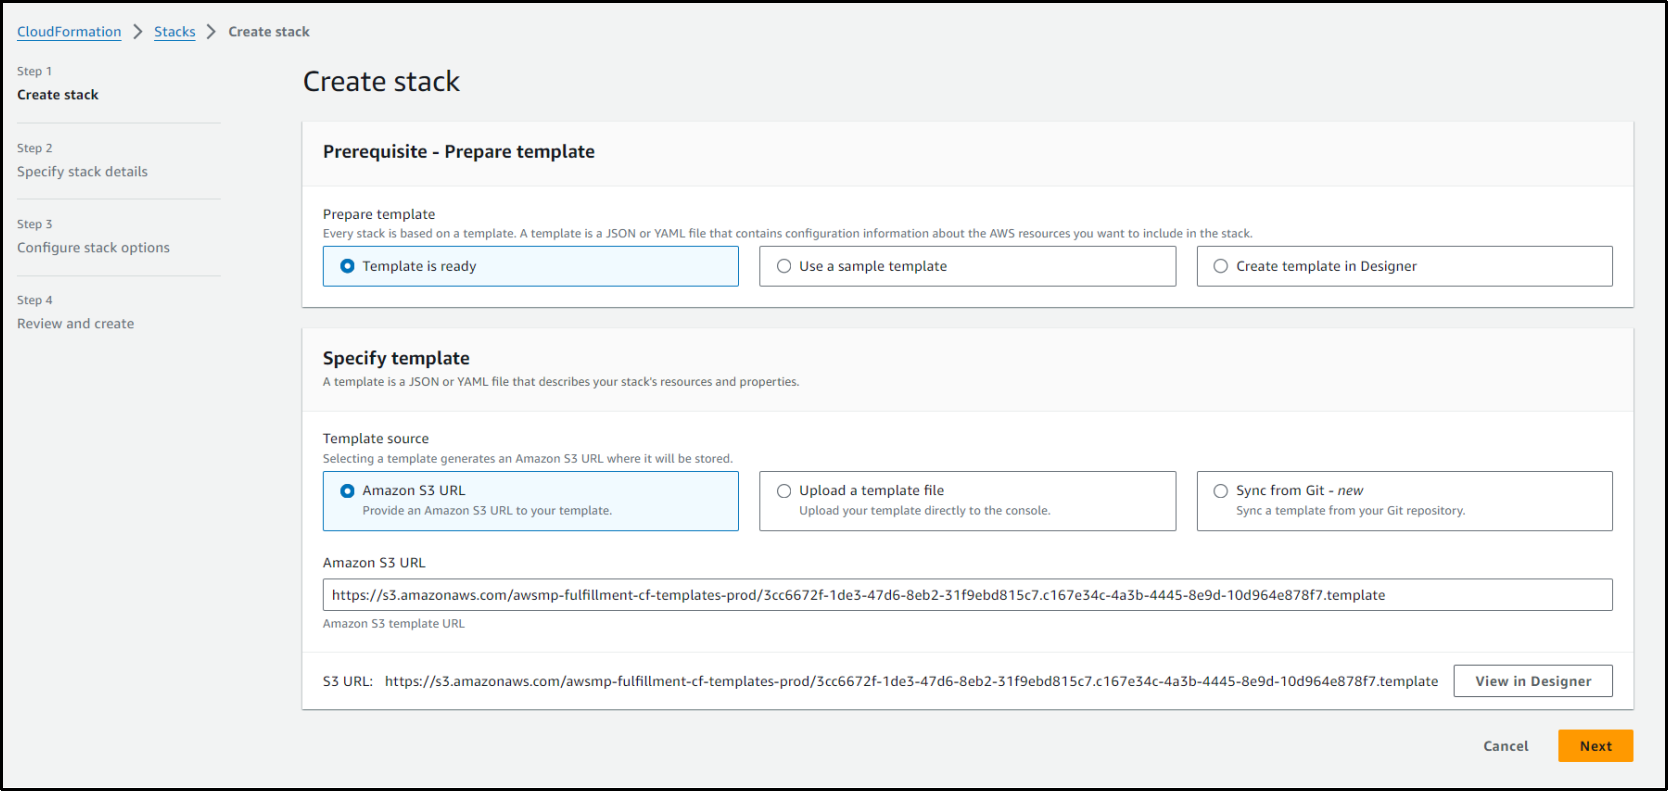 Image showing the create stack option with prerequsites to prepare the template and to specify the template source as Amazon S3 URL.